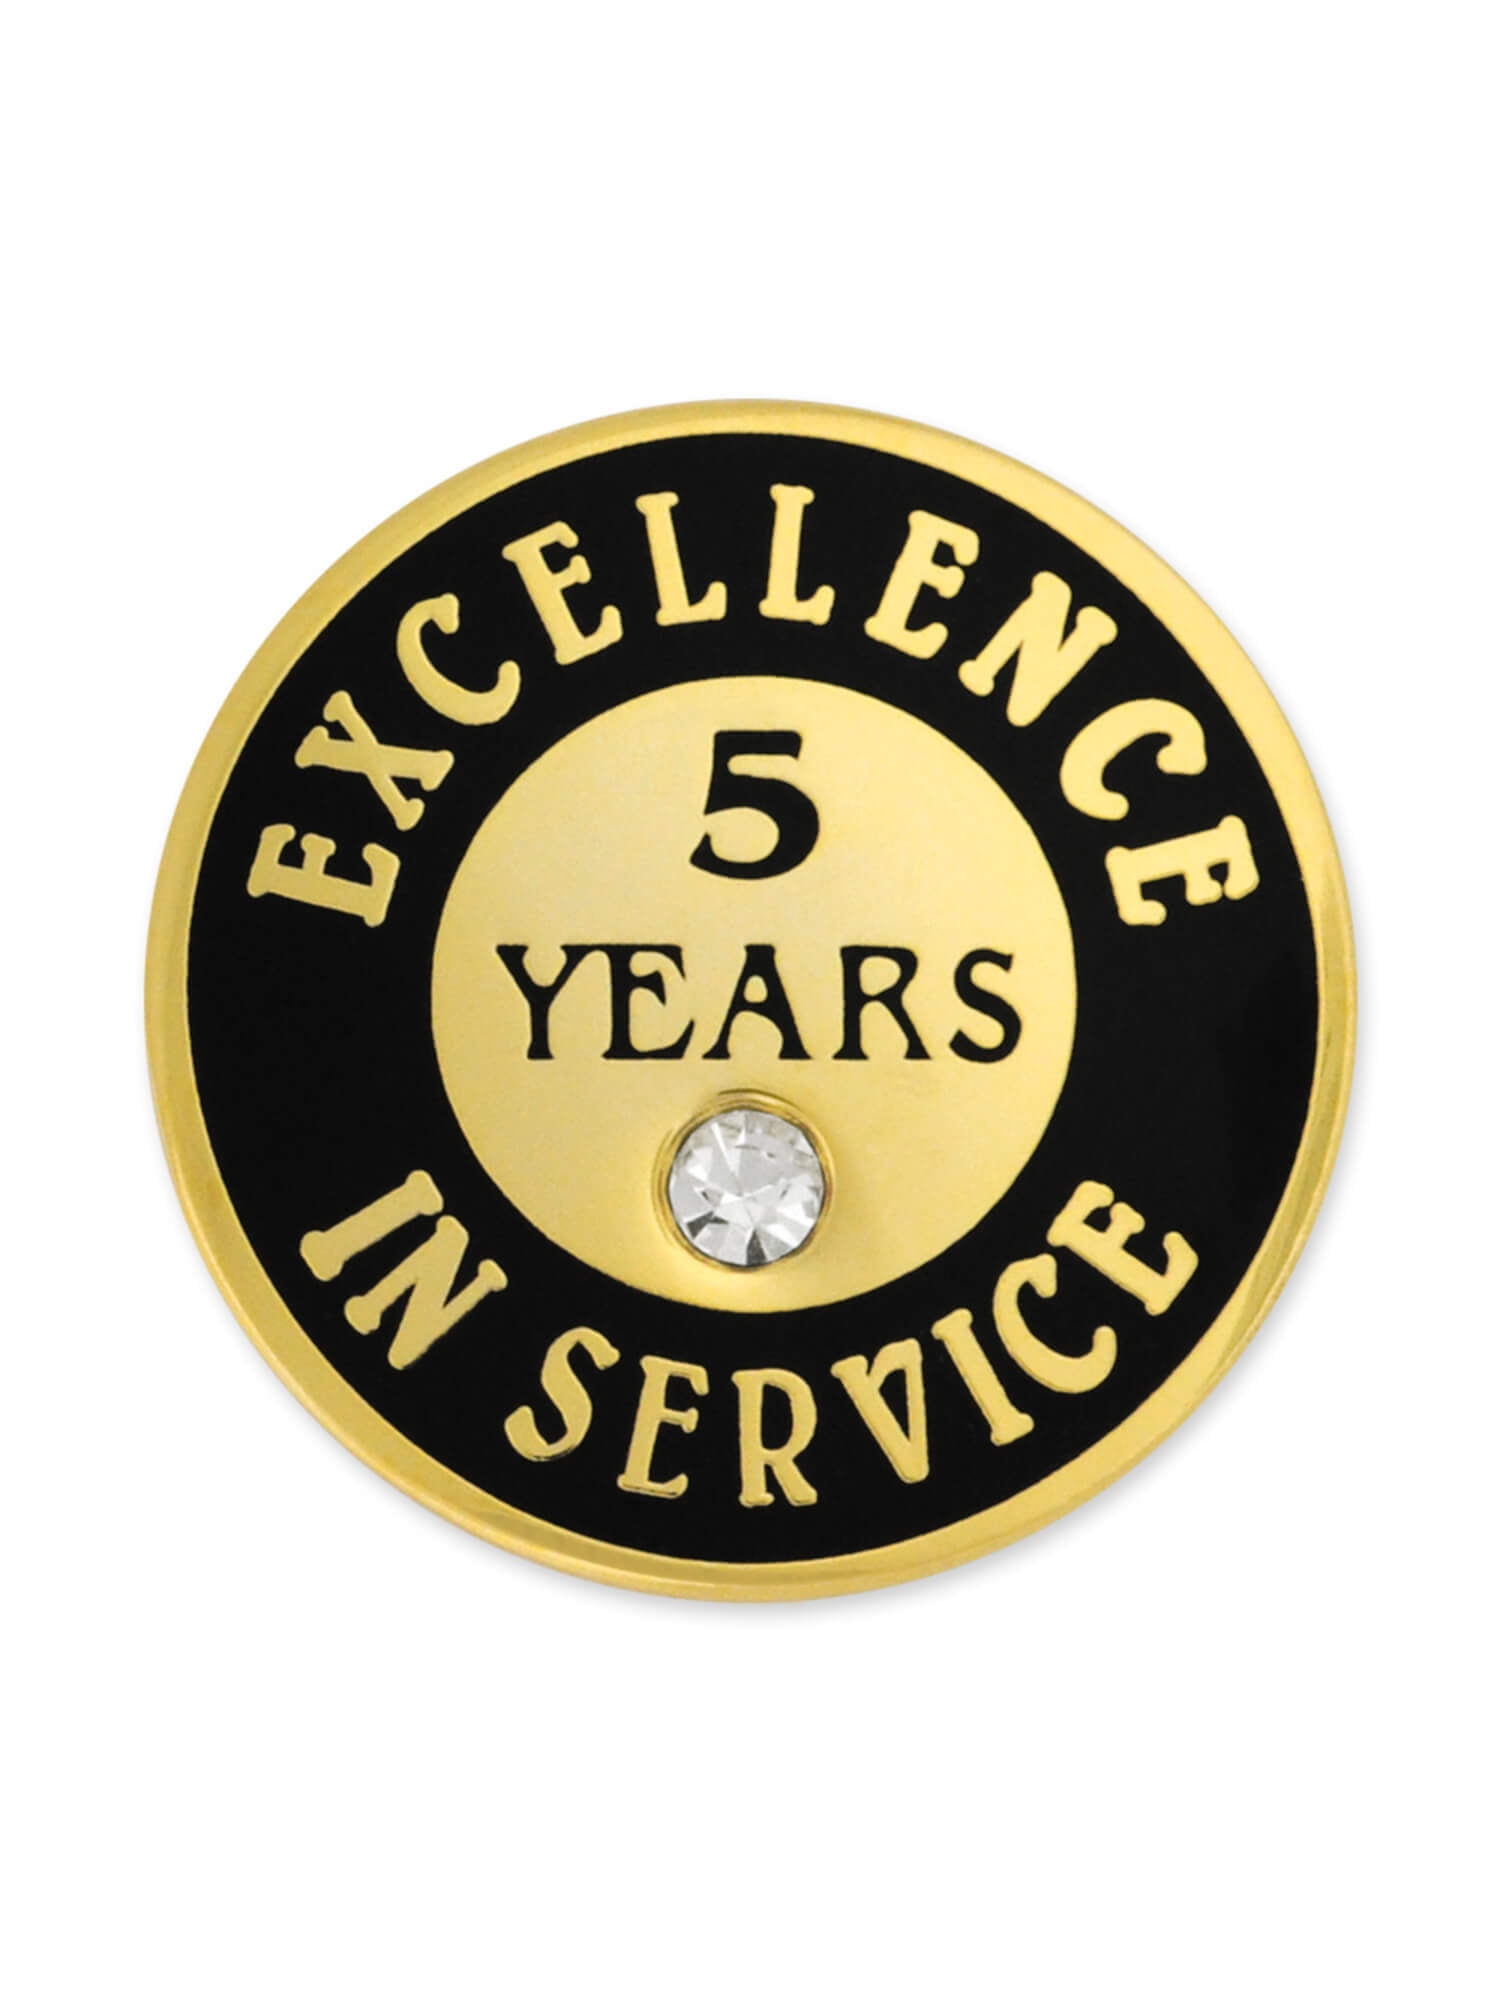 PinMart Gold Plated Excellence in Service 33 Year Award Lapel Pin 